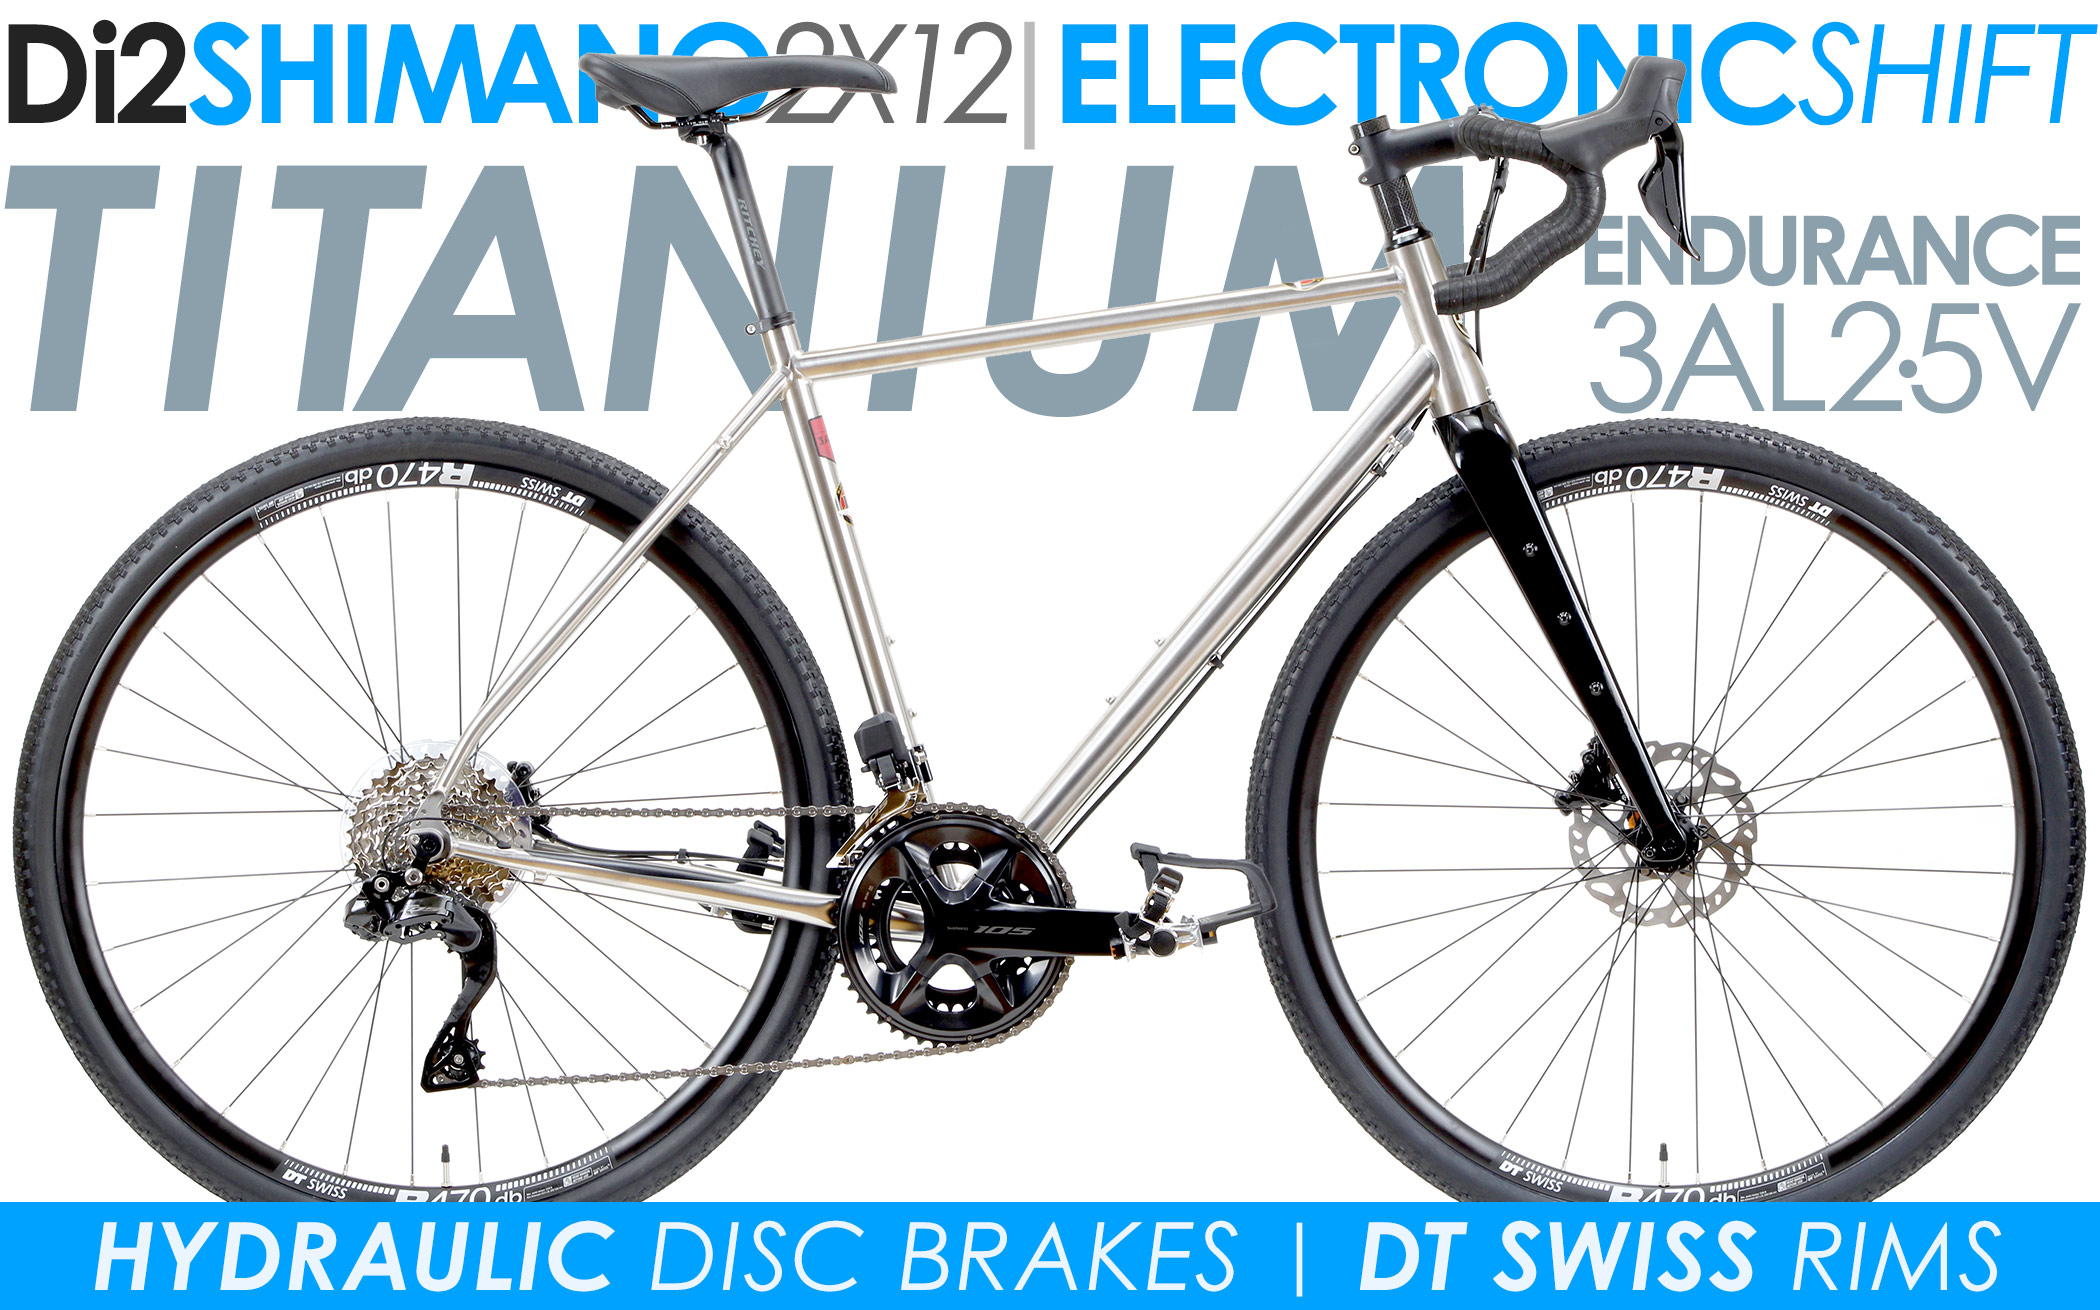 *ALL BIKES FREE SHIP 48 Fast Titanium Wide Tire Endurance Road Bikes
Motobecane Century Ti EXPERT Disc Di2, DT SWISS Wheelset, Full Carbon Forks, Shimano ELECTRONIC R7100/105 Di2 2X12 Speed, Competition Proven, FULL Shimano ELECTRONIC Shift, R7100/105 Di2 Components, Hydraulic Disc Brakes Riding